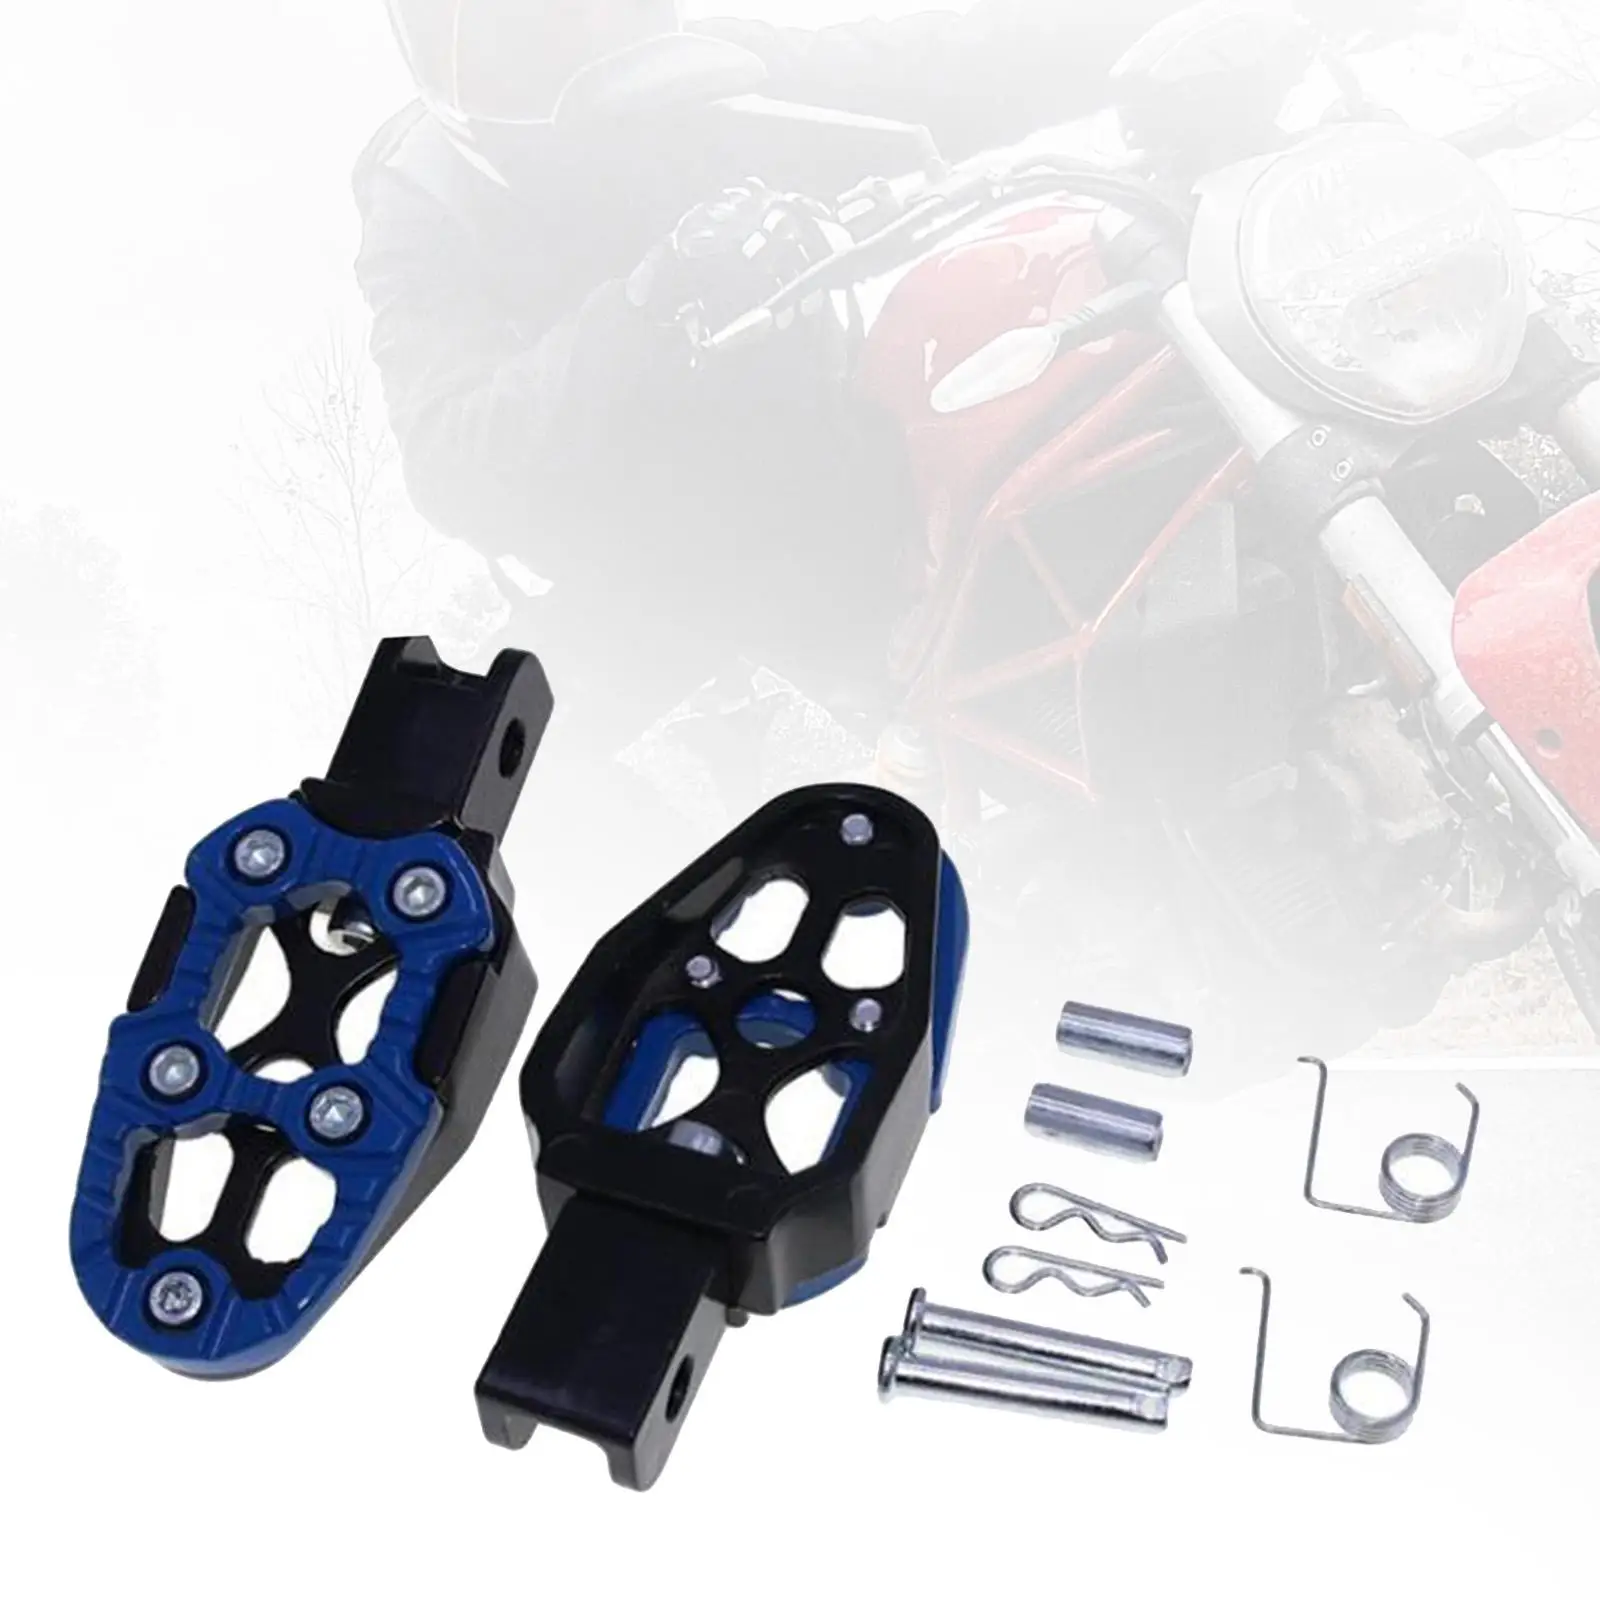 Motorbike Footrests Pedals Wide Footpegs AntiSlip Dirt bike to Install Aluminum Alloy Durable Motorcycle Back Foot Pegs